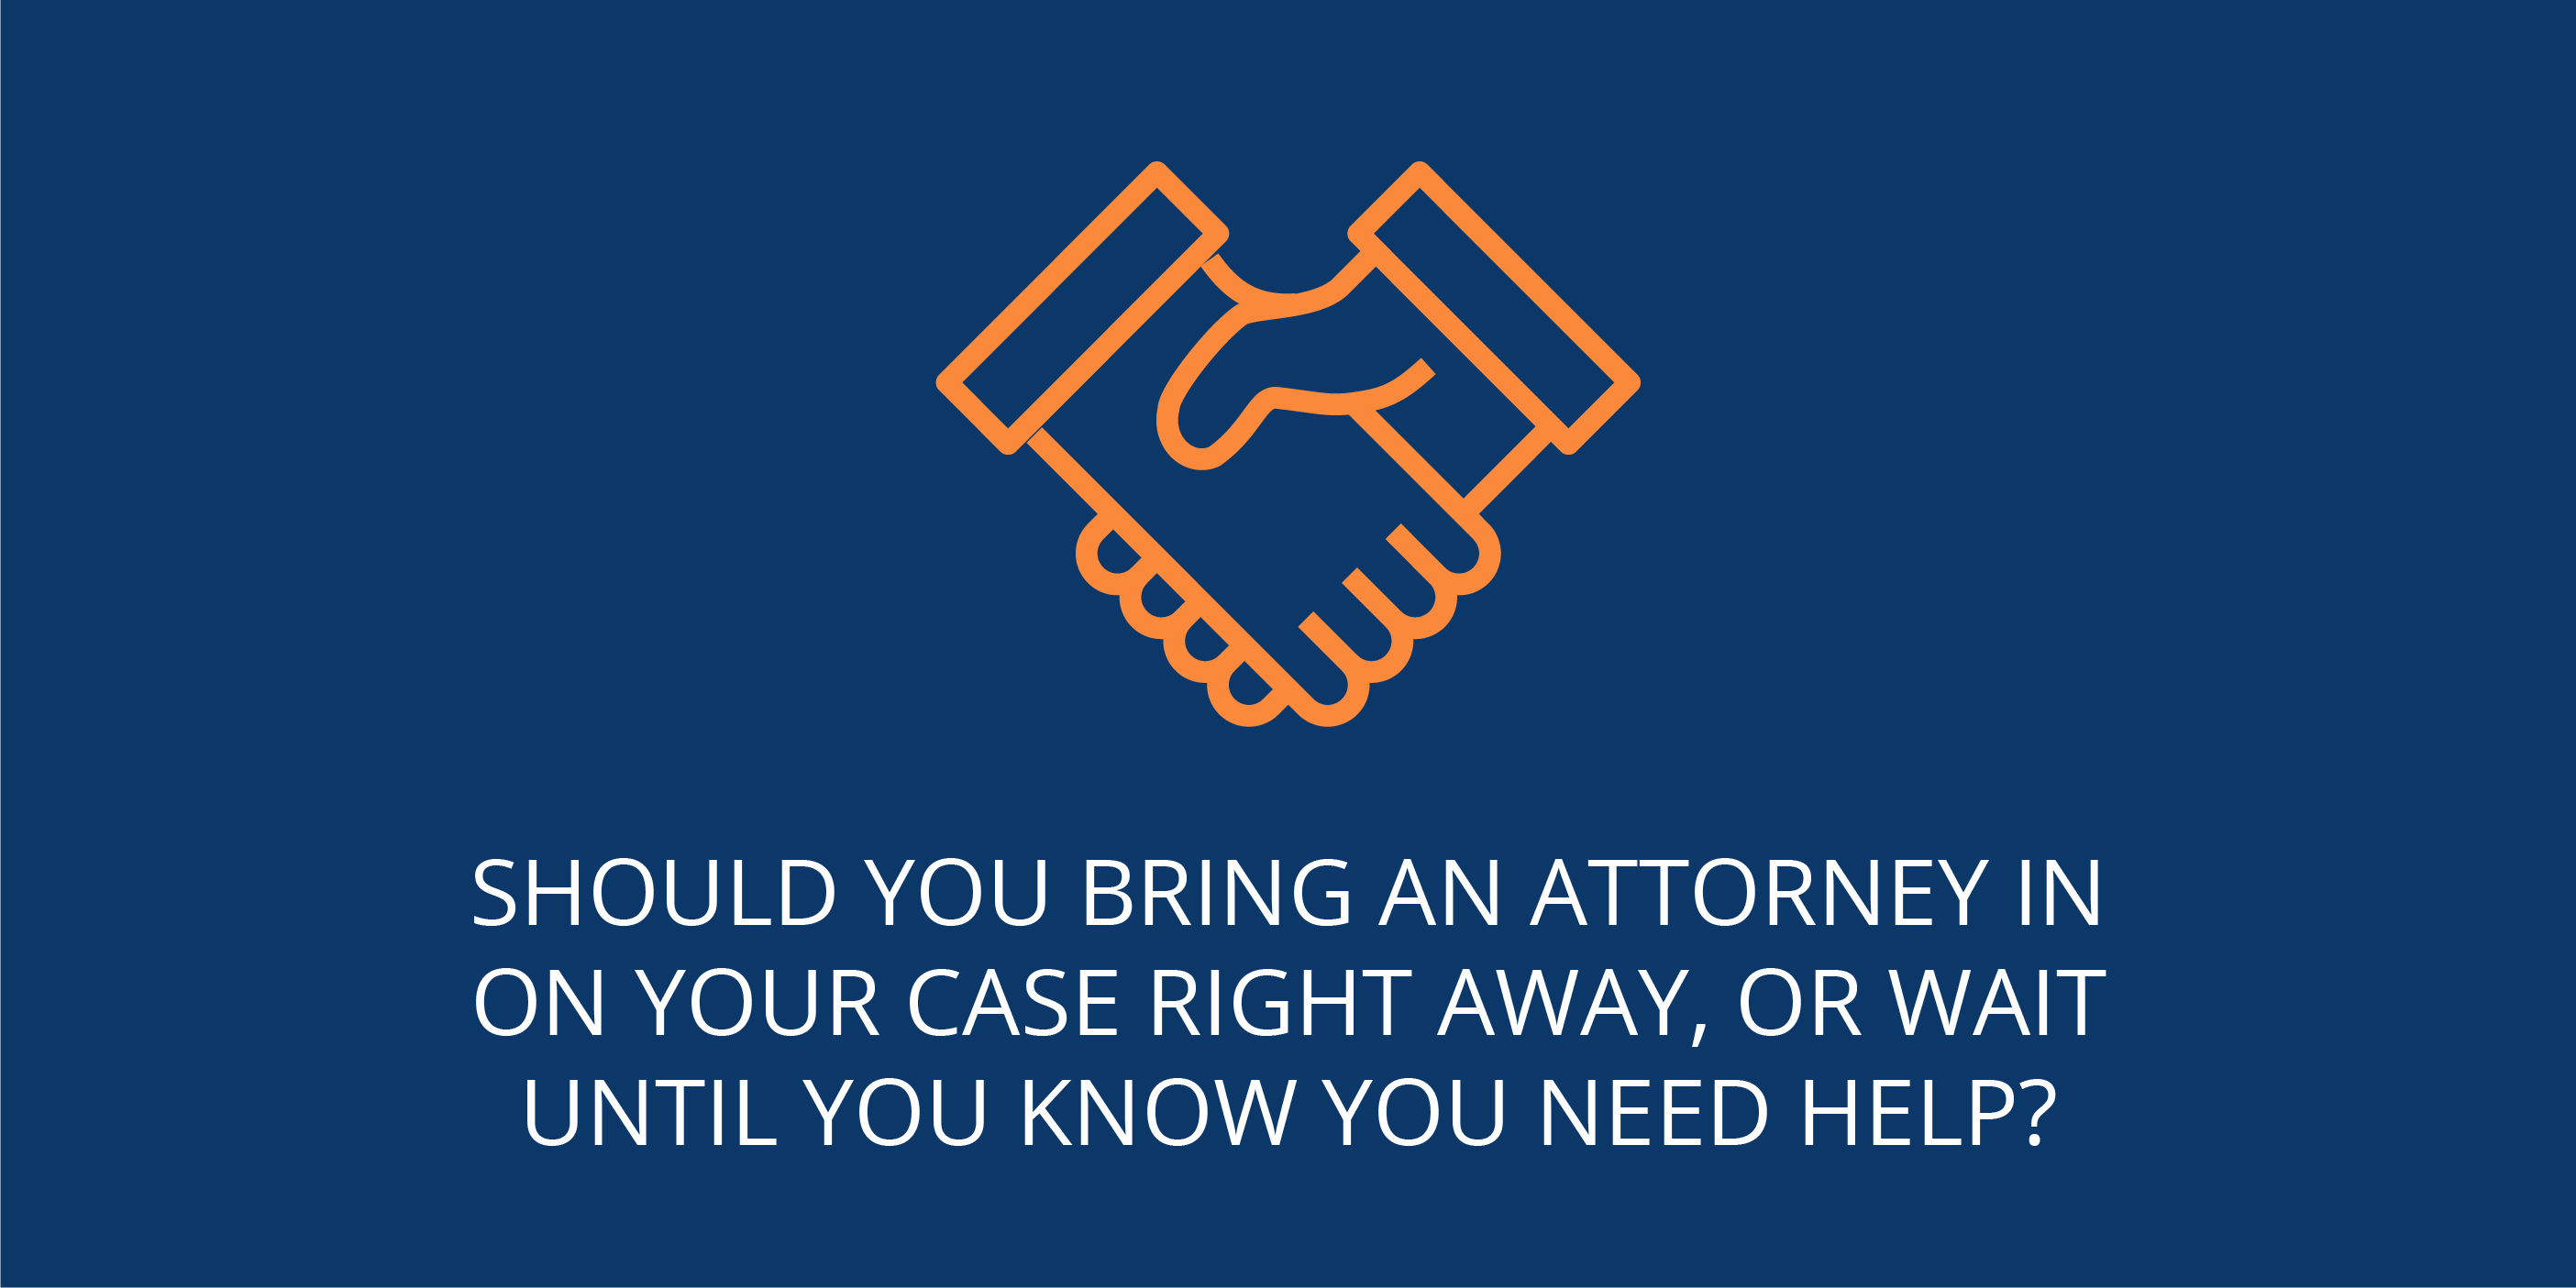 Should you bring an attorney in on your case right away, or wait until you know you need help?